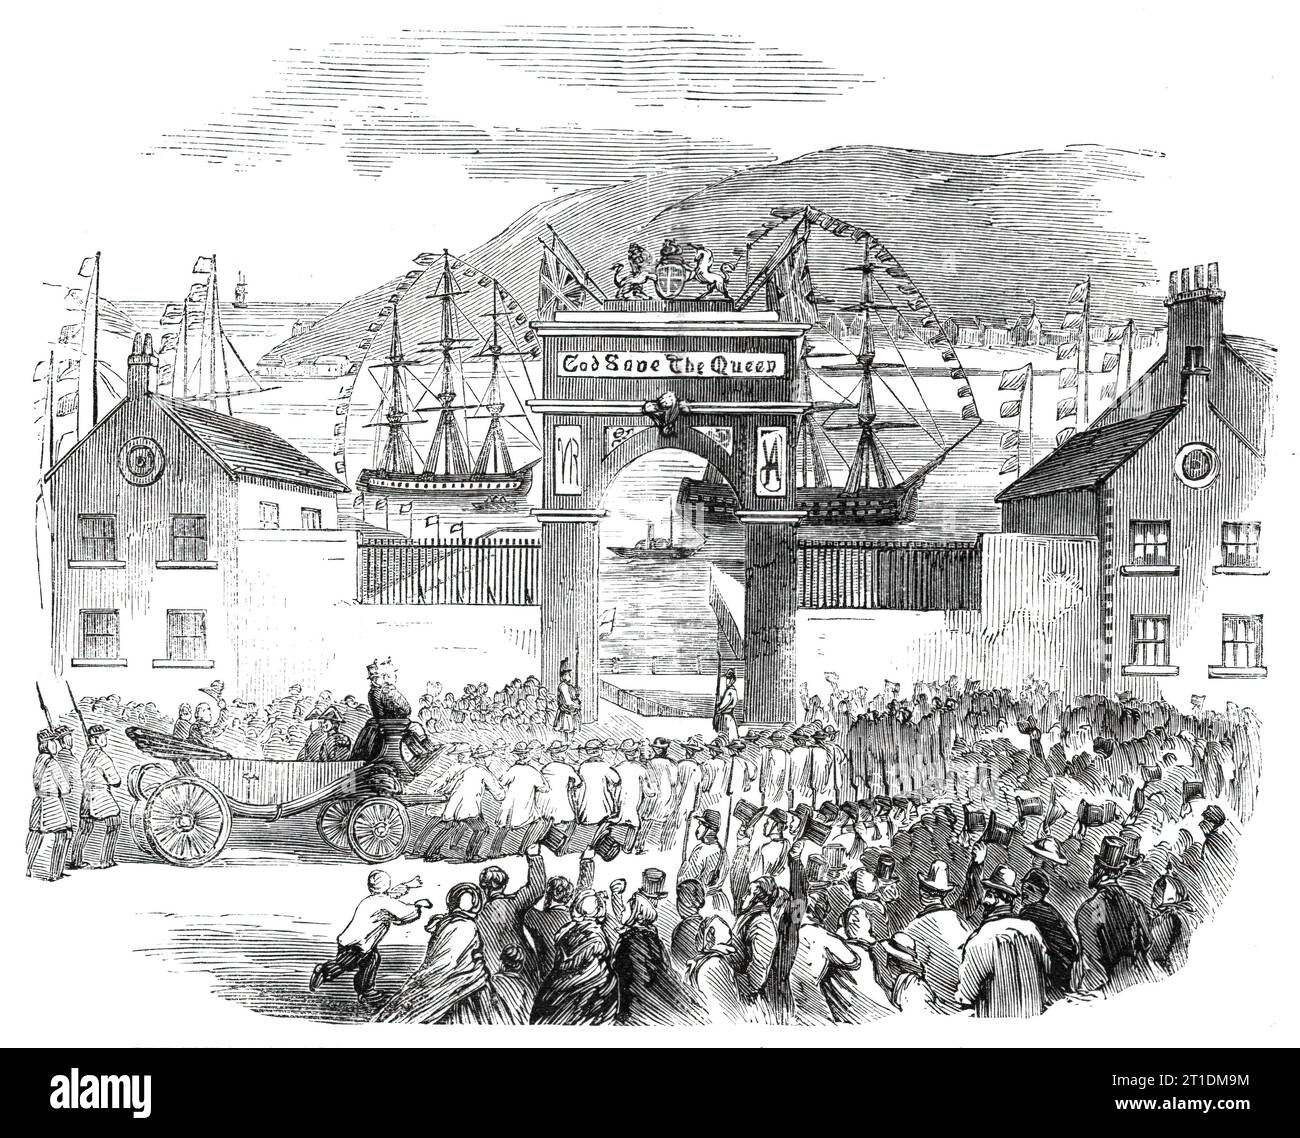 The Embarkation of the Prince of Wales at the Queen's Wharf, St. John's, Newfoundland, 1860. The future King Edward VII visits North America. Engraving from a sketch by Mr. Delaney. 'When the Prince, with the Earl of St. Germans and his Excellency and Lady Bannerman, entered the carriage at Government House there was a spontaneous and eloquent expression of the popular feeling for the Heir to the Throne. The horses were no sooner harnessed than a number of fine stalwart fellows came forward from amongst the crowd and insisted on taking the place of the horses and drawing the carriages themselv Stock Photo